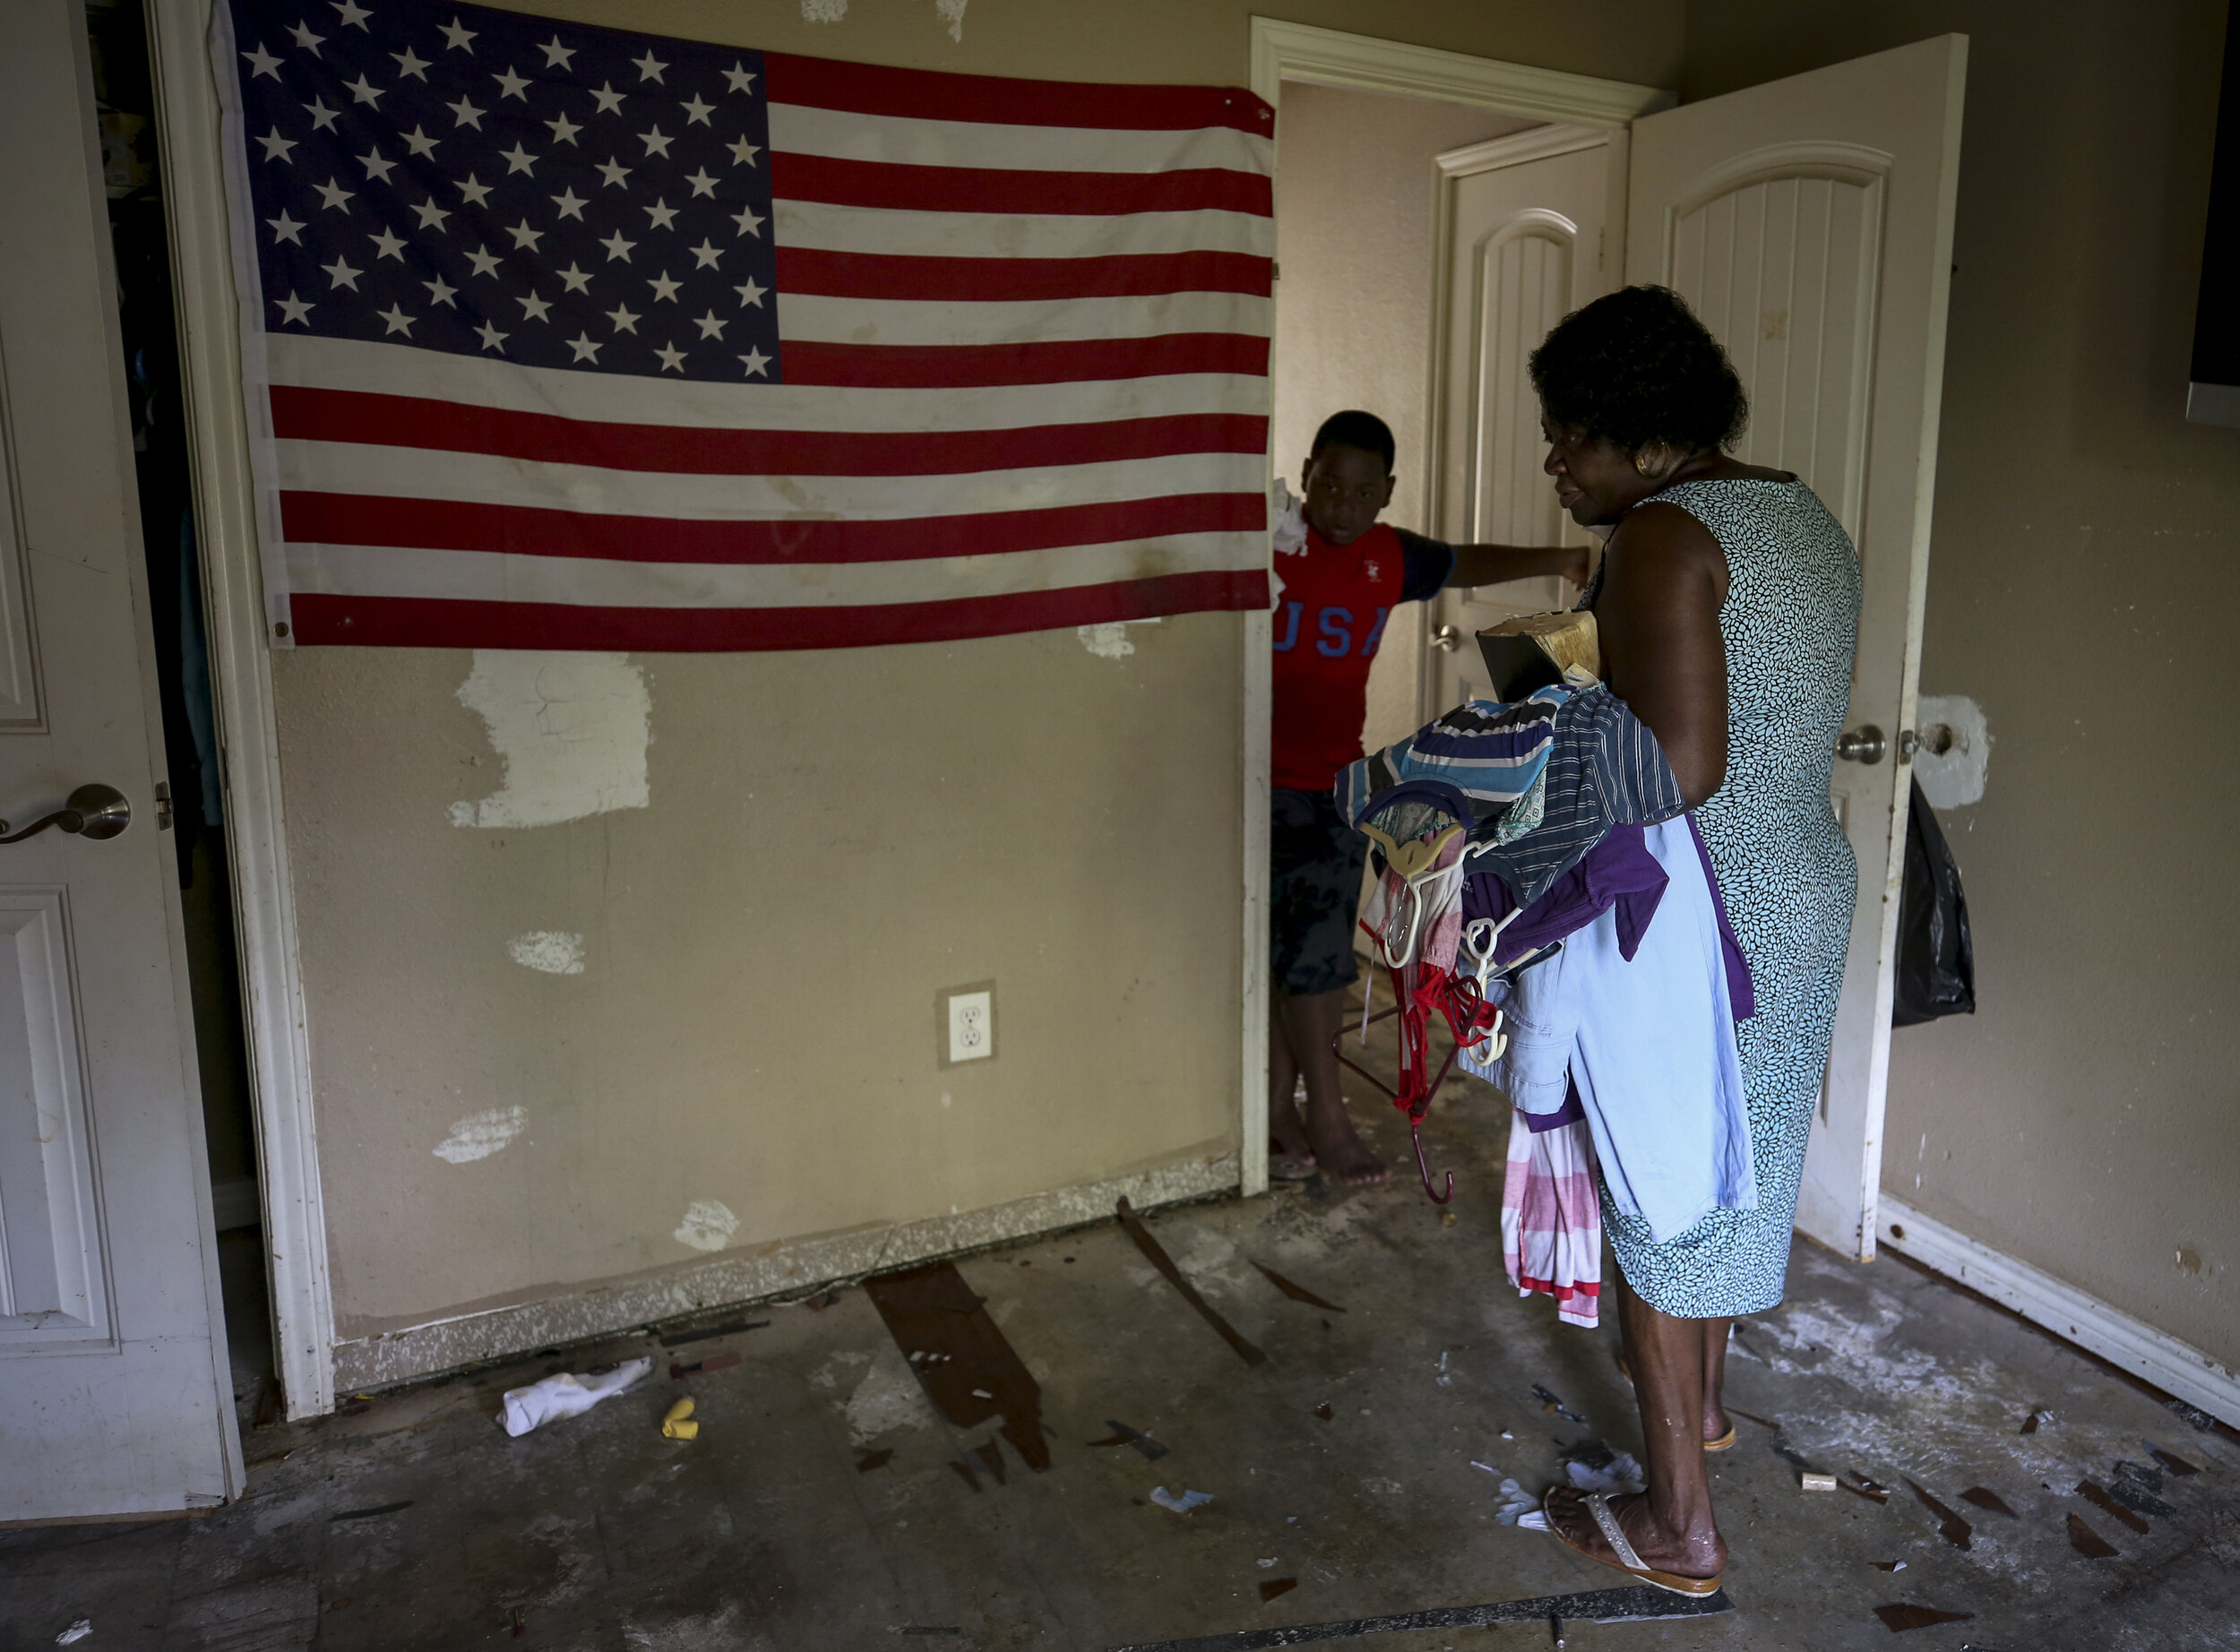  Hilda Robinson, 65, walks through her home after her family helped with cleanup Sunday, Sept. 3, 2017, in Beaumont, Texas. Robinson's home, where she has lived the last 15 years, was flooded with roughly four feet of water according to her family. 